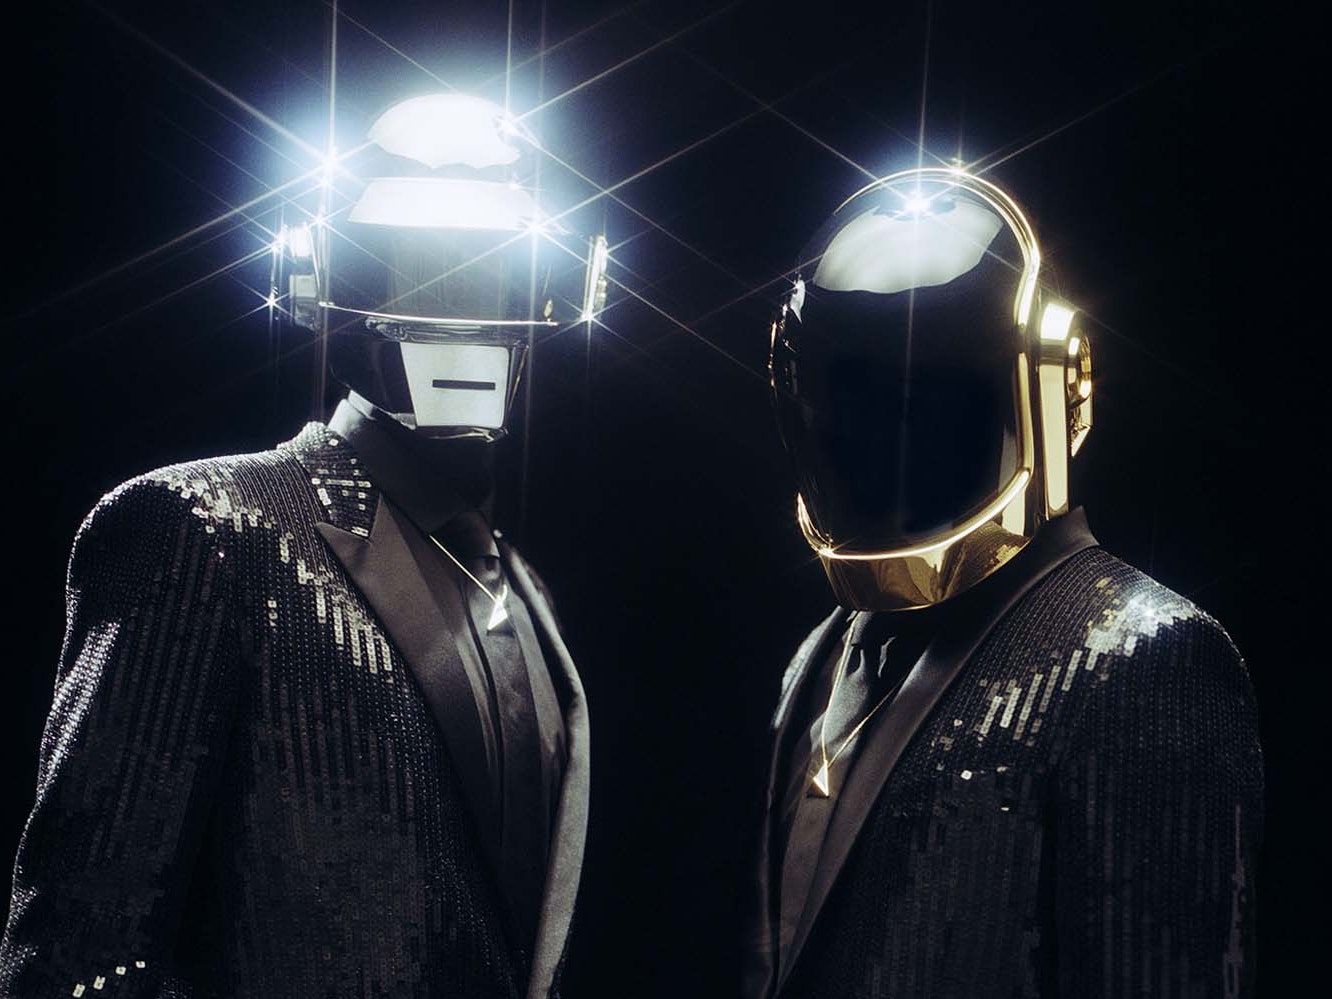 Does Daft Punk’s Random Access Memories Hold Up 10 Years Later?